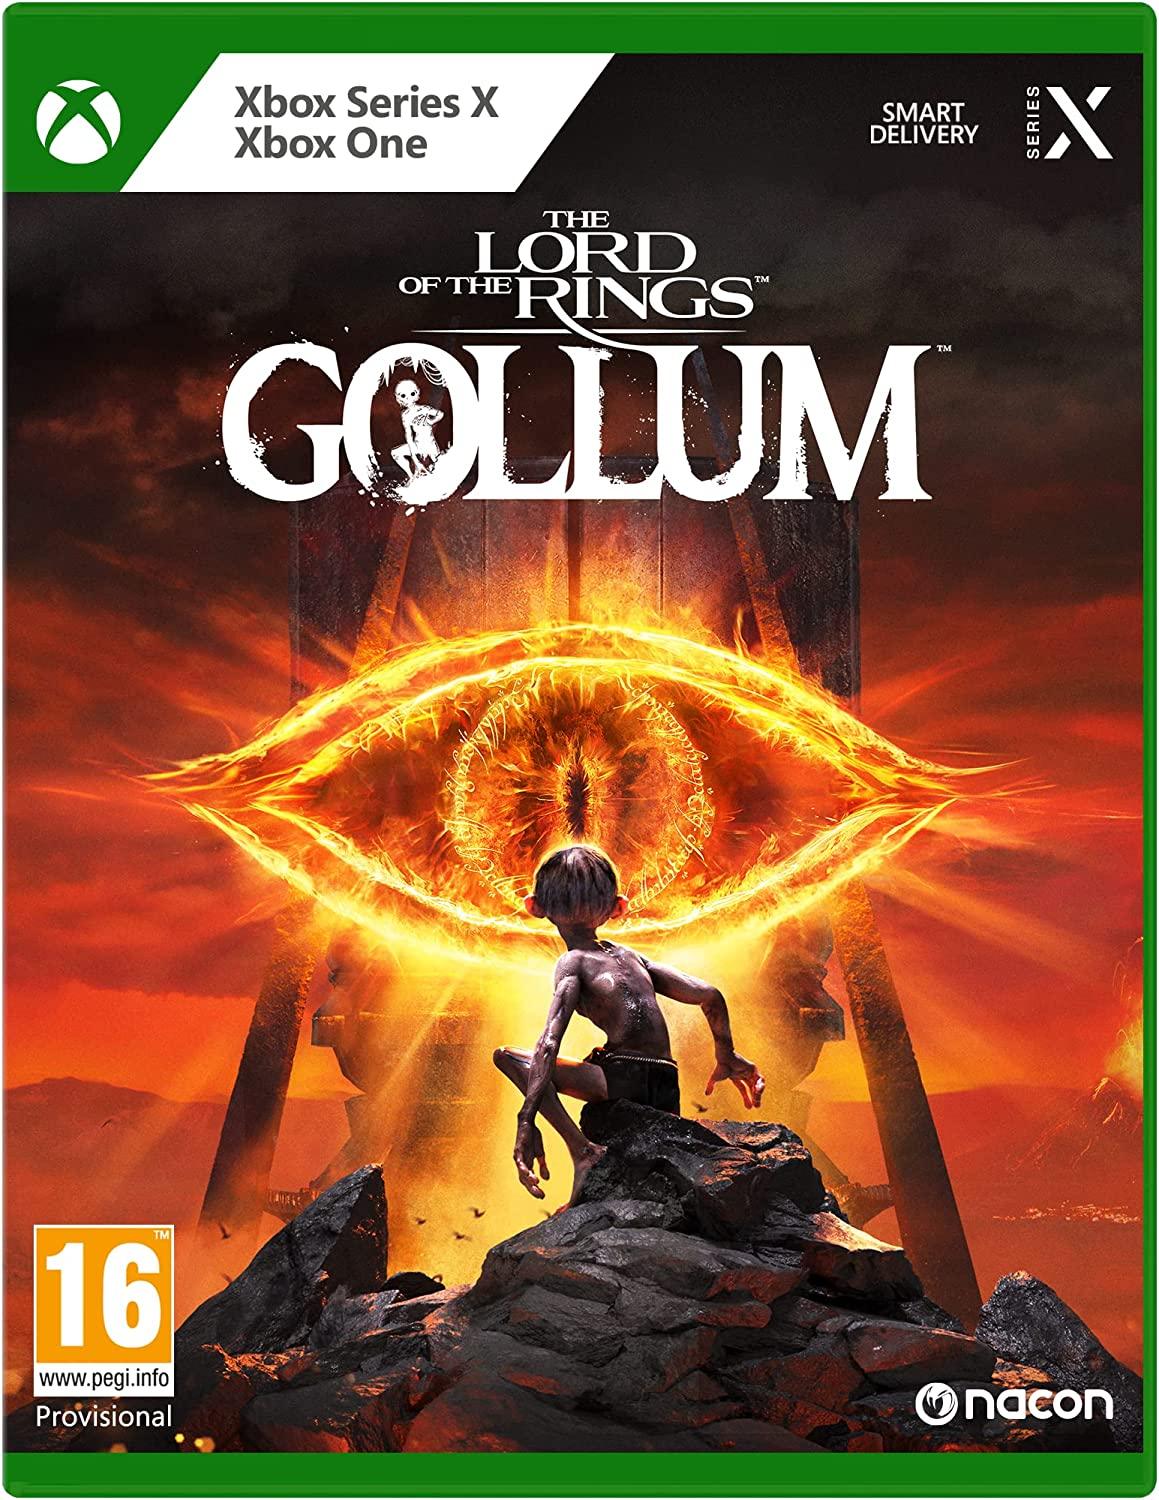 The Lord of the Rings: Gollum (Xbox Series X) (Xbox One) - GameStore.mt | Powered by Flutisat